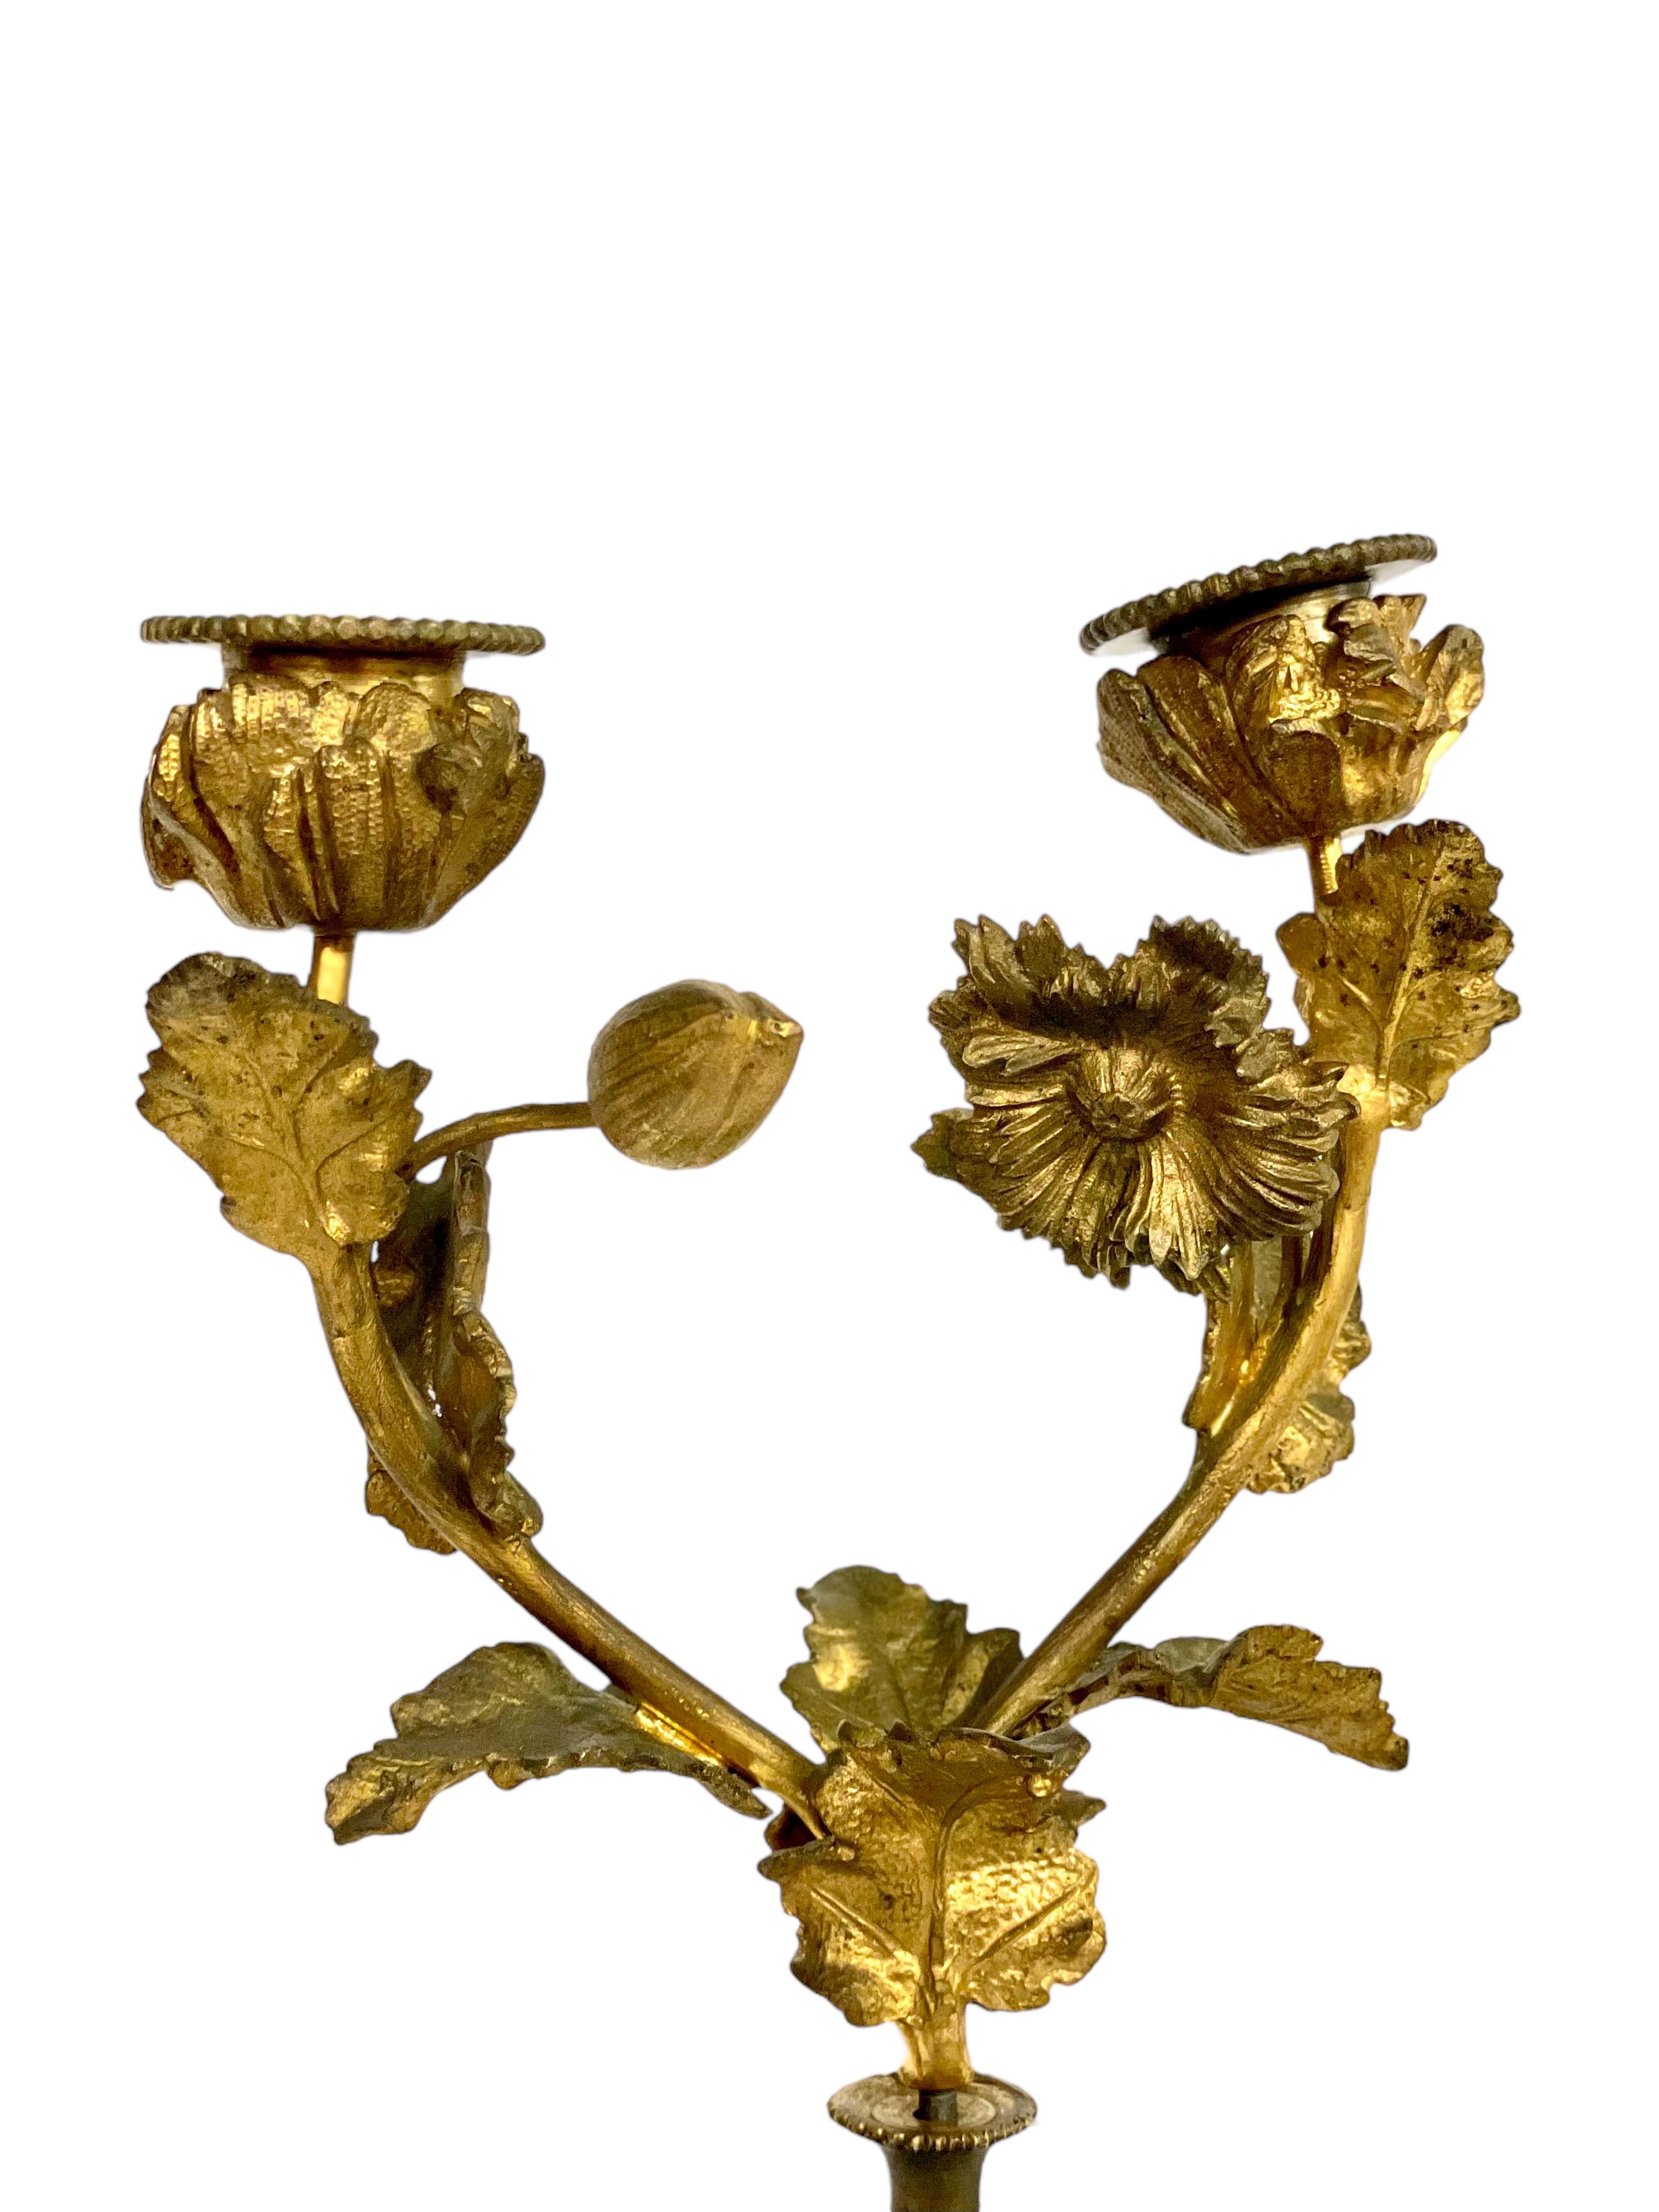 An absolutely stunning pair of late 19th century Louis XVI style two-light candelabras in Sèvres- style porcelain and gilt bronze ormolu. These magnificent candle holders feature pear-shaped porcelain lower sections, hand painted with polychrome